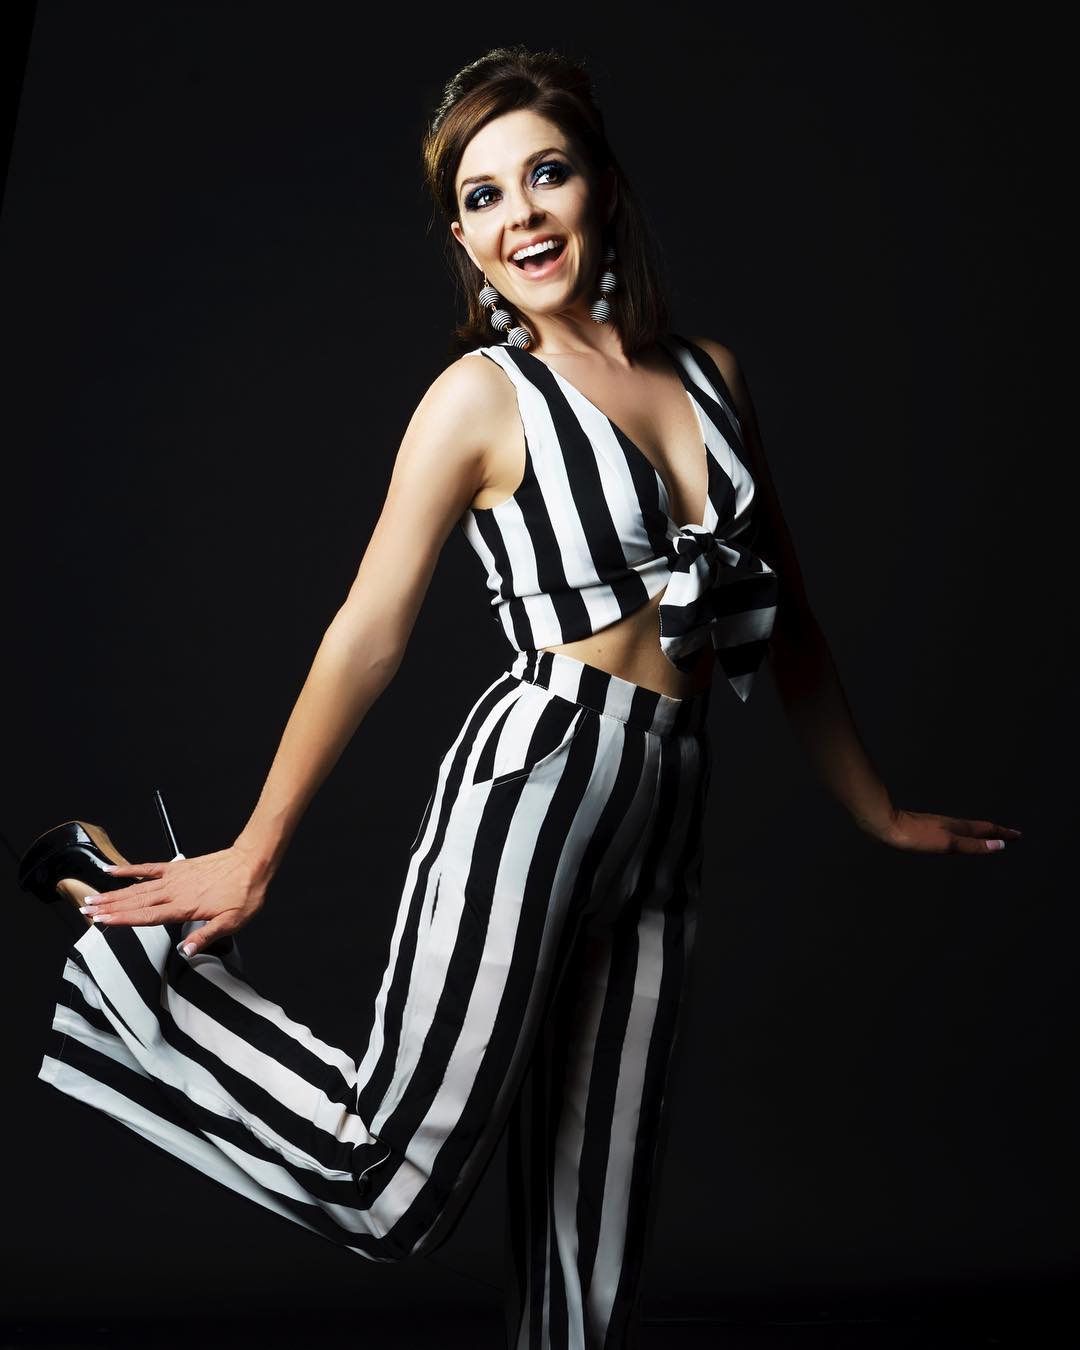 65+ Hot Pictures Of Jen Lilley Which Will Make You Melt | Best Of Comic Books